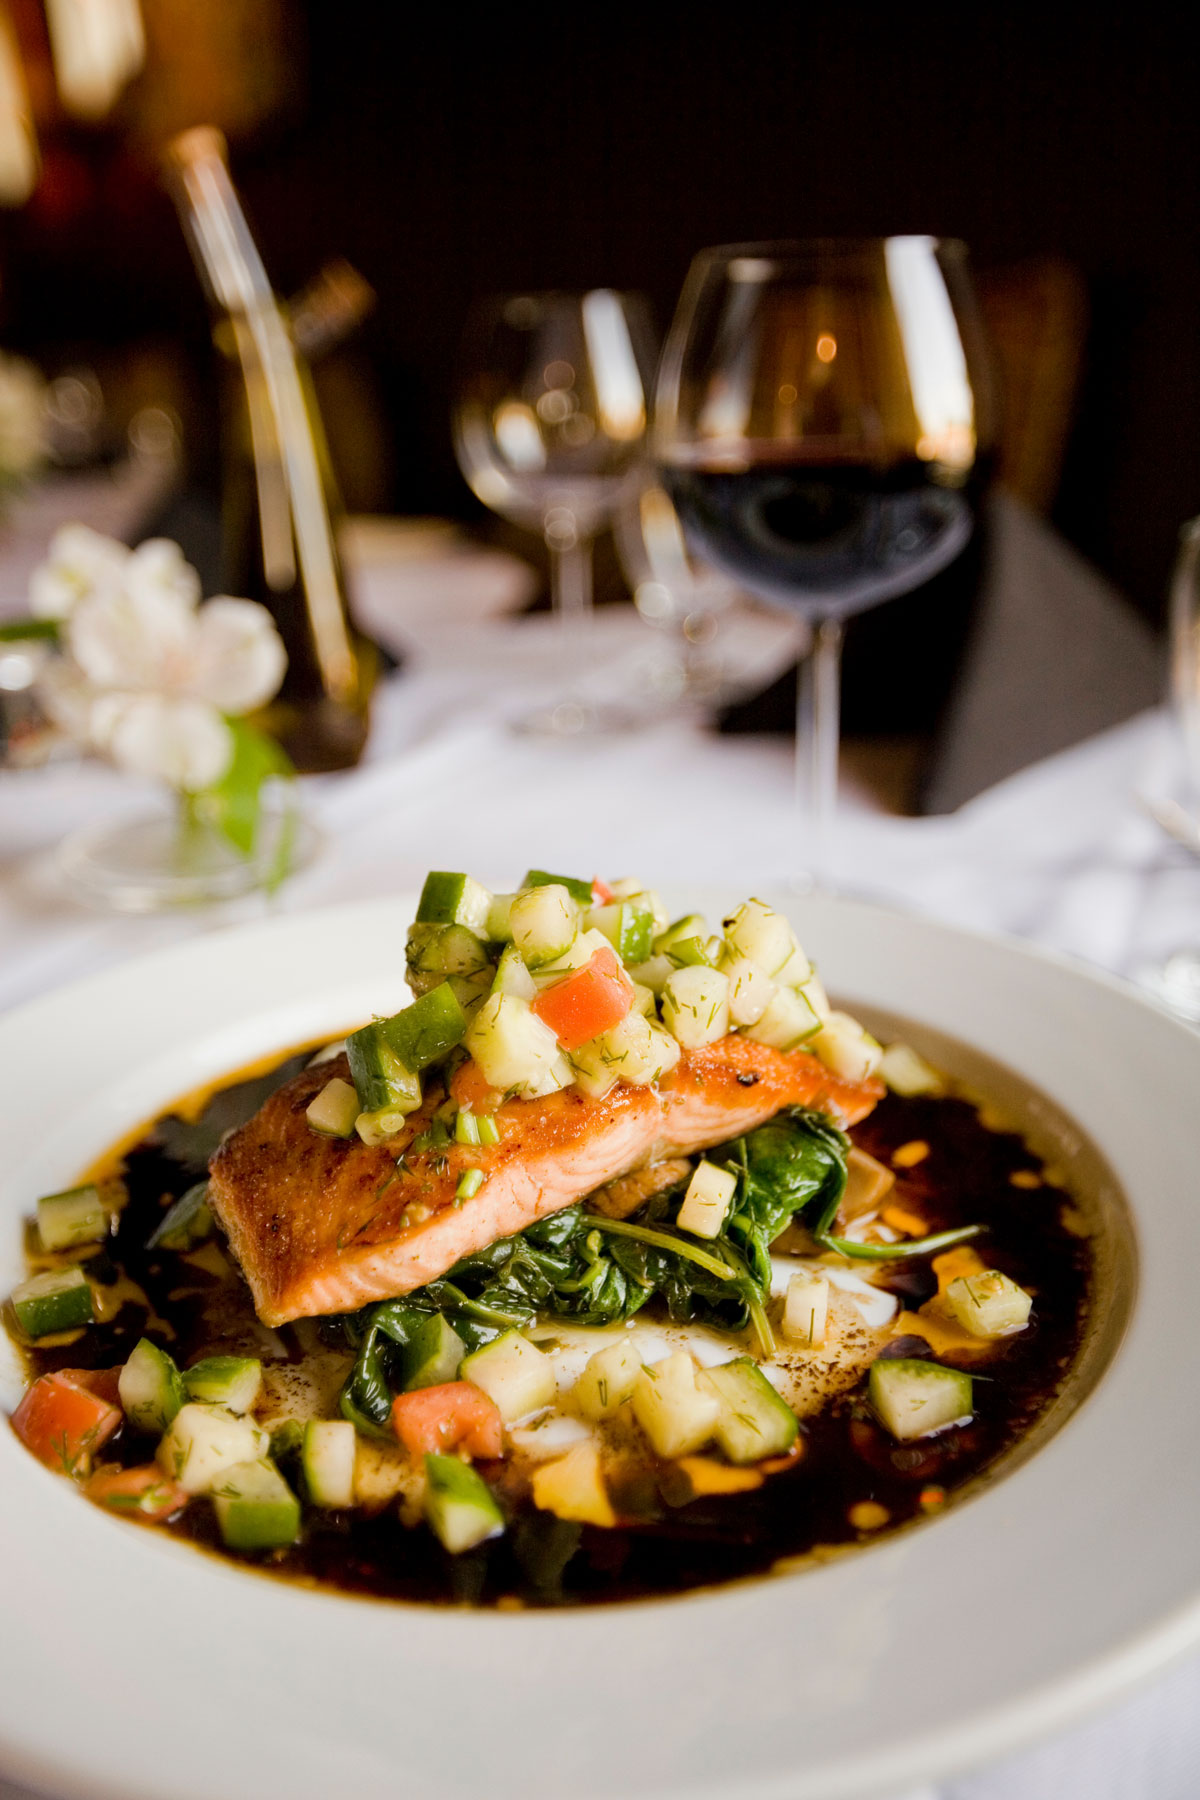 Salmon Wine Pairing: Which Wines Work With Your Favorite Foods